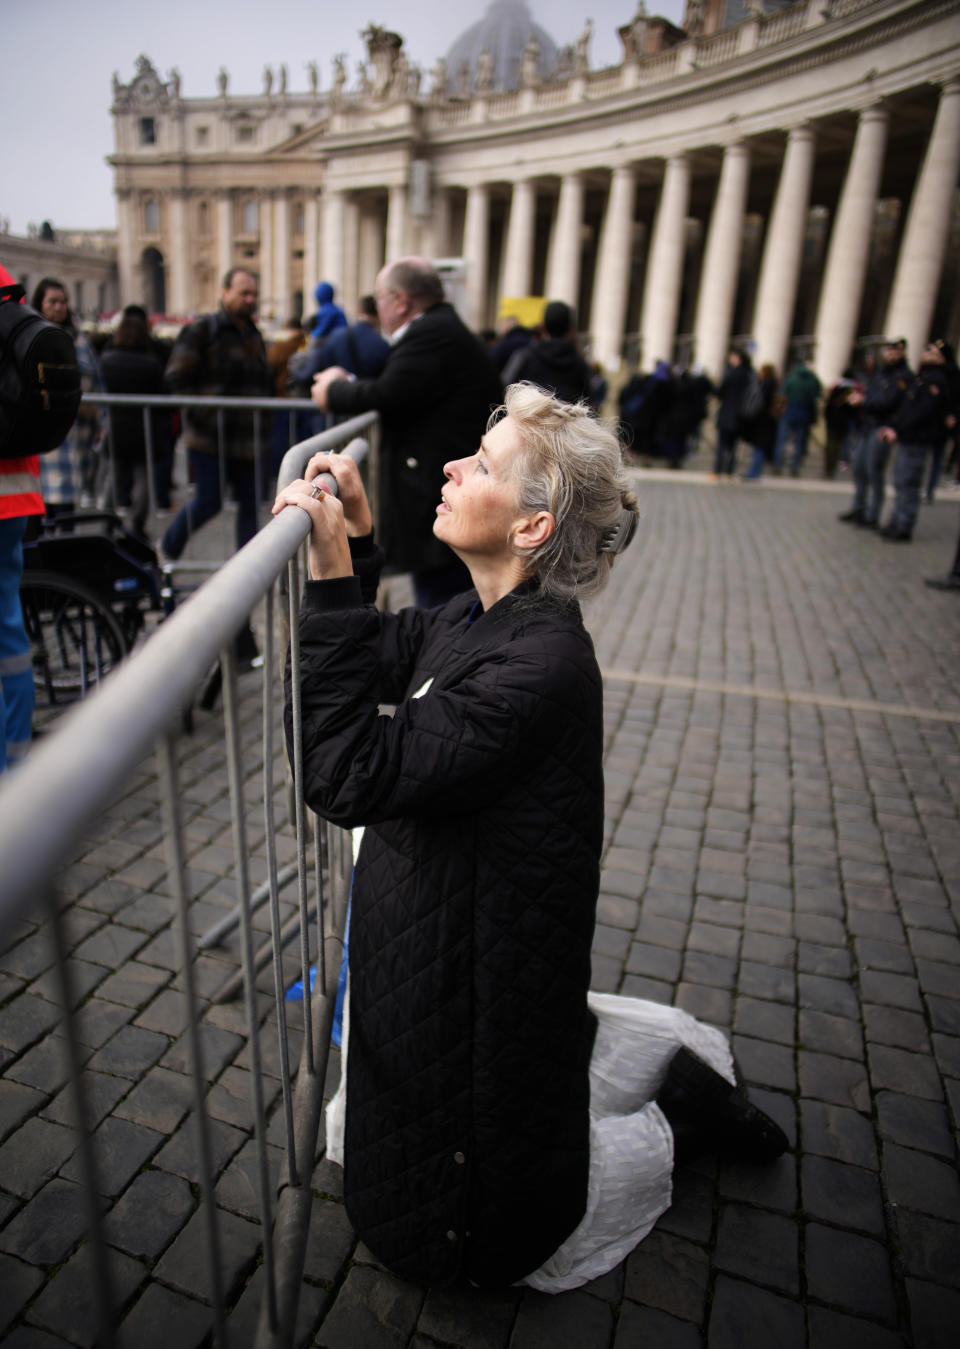 A woman attends the funeral mass for late Pope Emeritus Benedict XVI in St. Peter's Square at the Vatican, Thursday, Jan. 5, 2023. Benedict died at 95 on Dec. 31 in the monastery on the Vatican grounds where he had spent nearly all of his decade in retirement. (AP Photo/Domenico Stinellis)